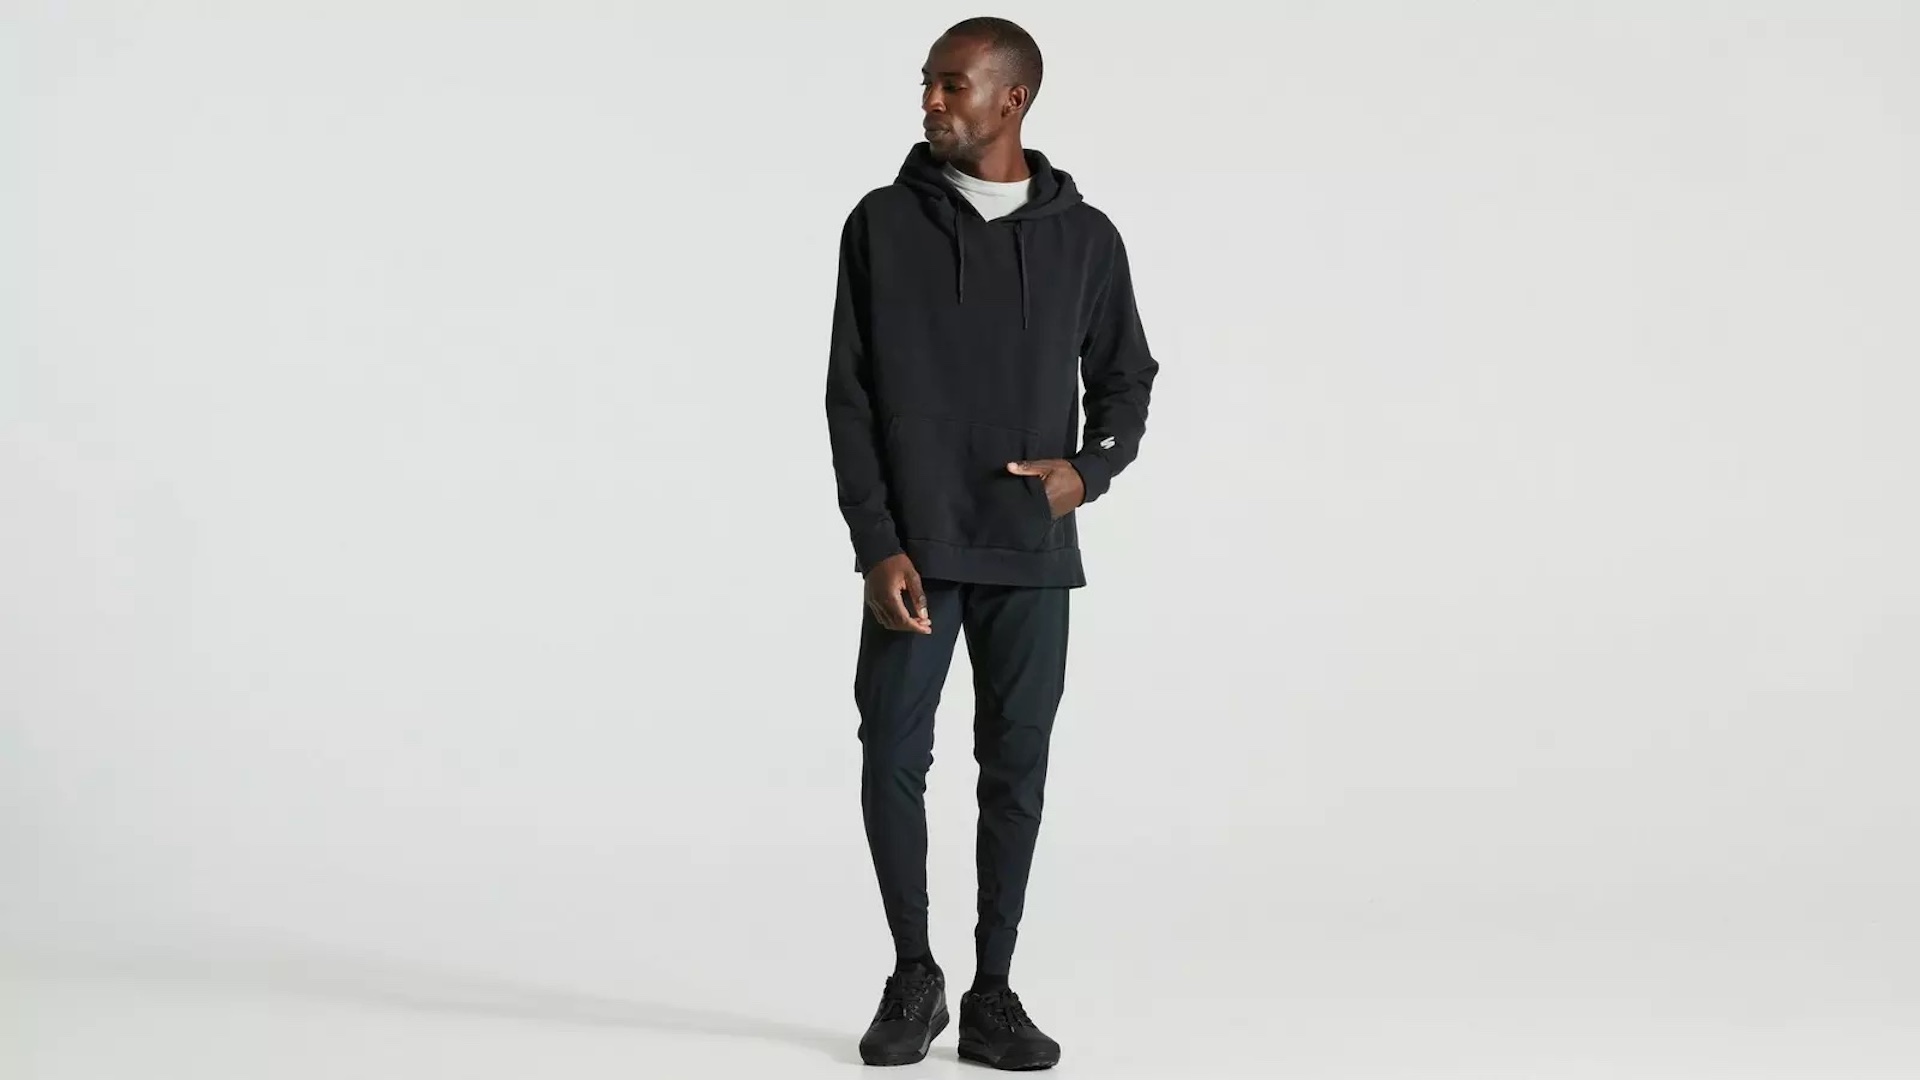 A black man models a Specialized cotton hoodie. He's dressed head to toe in black except for a white t-shirt and is looking contemplatively off his right shoulder.